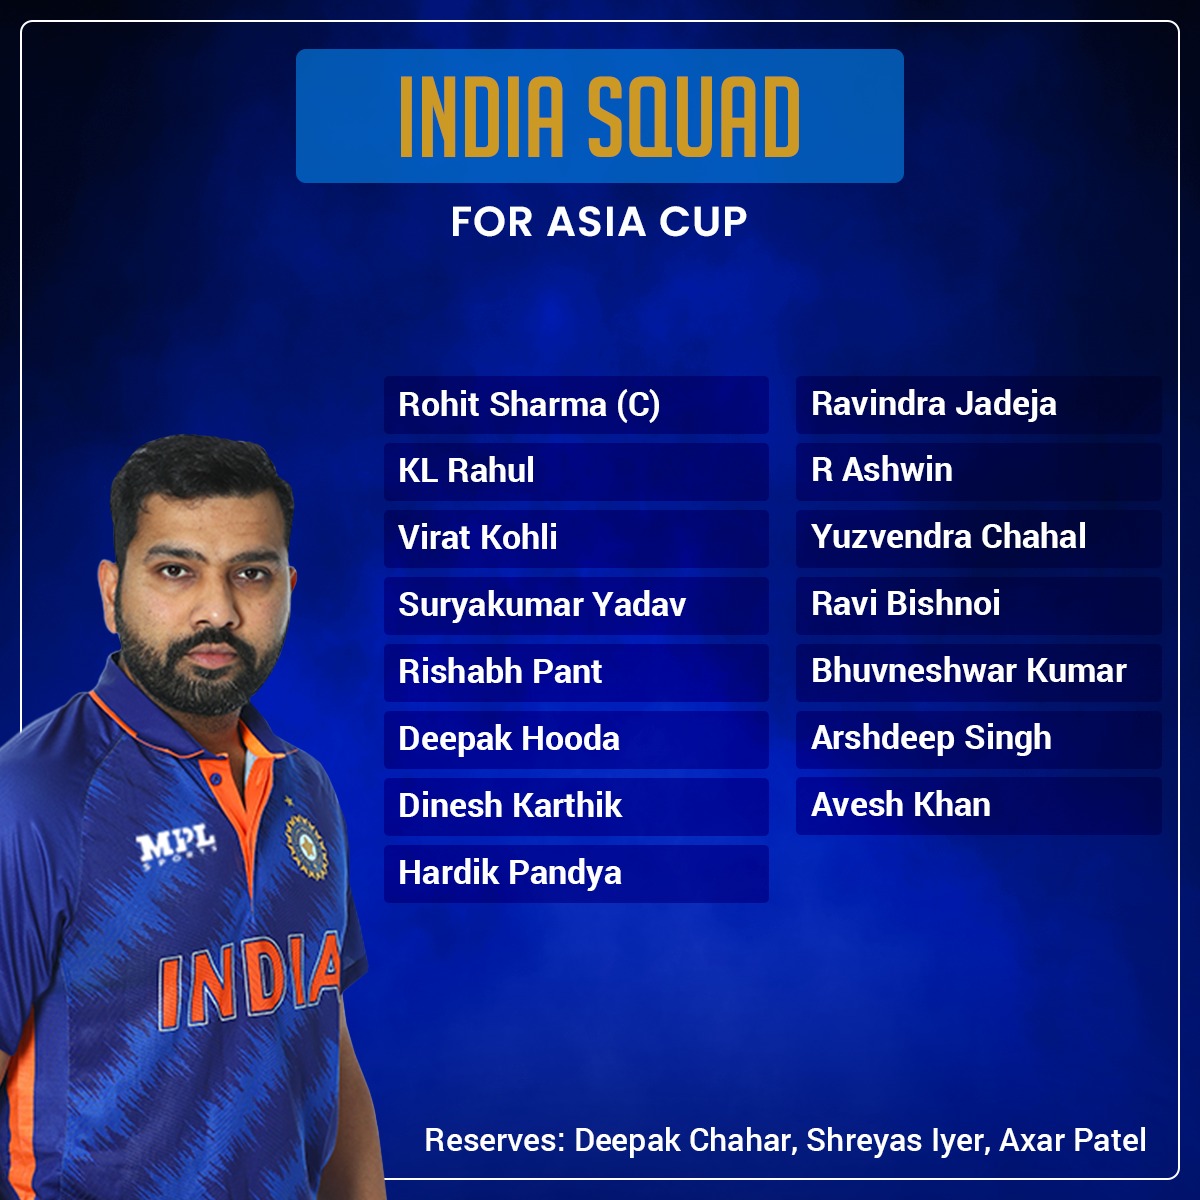 🚨 India's squad for the Asia Cup 2022 has been announced. Sanju Samson, Ishan Kishan miss out while Virat Kohli and KL Rahul return to the side.